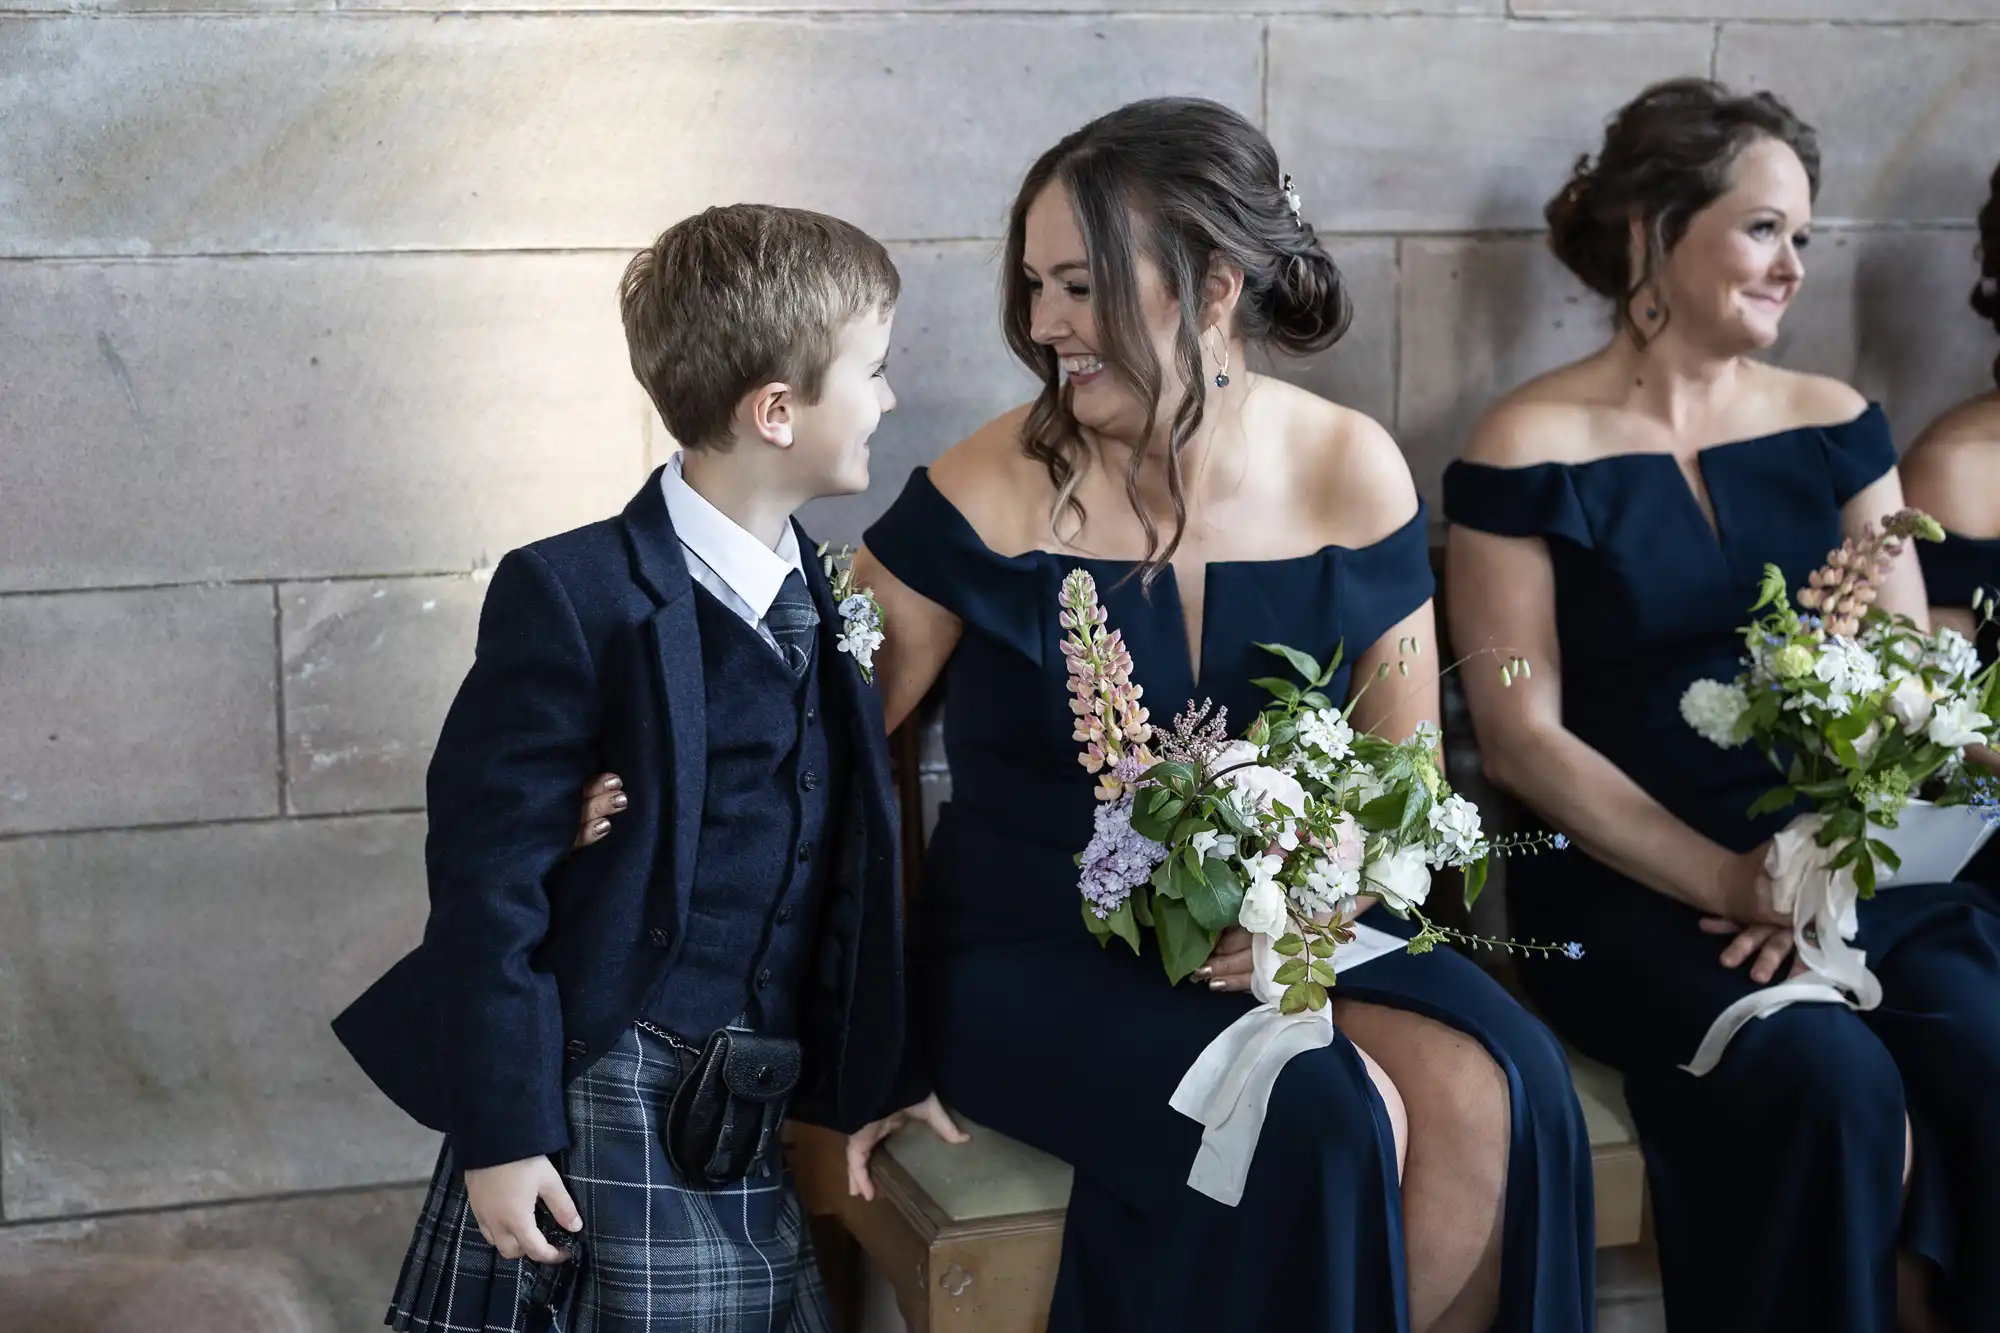 A young boy in a kilt smiles at a woman in a navy dress holding flowers, sitting beside another woman with flowers at a formal event.